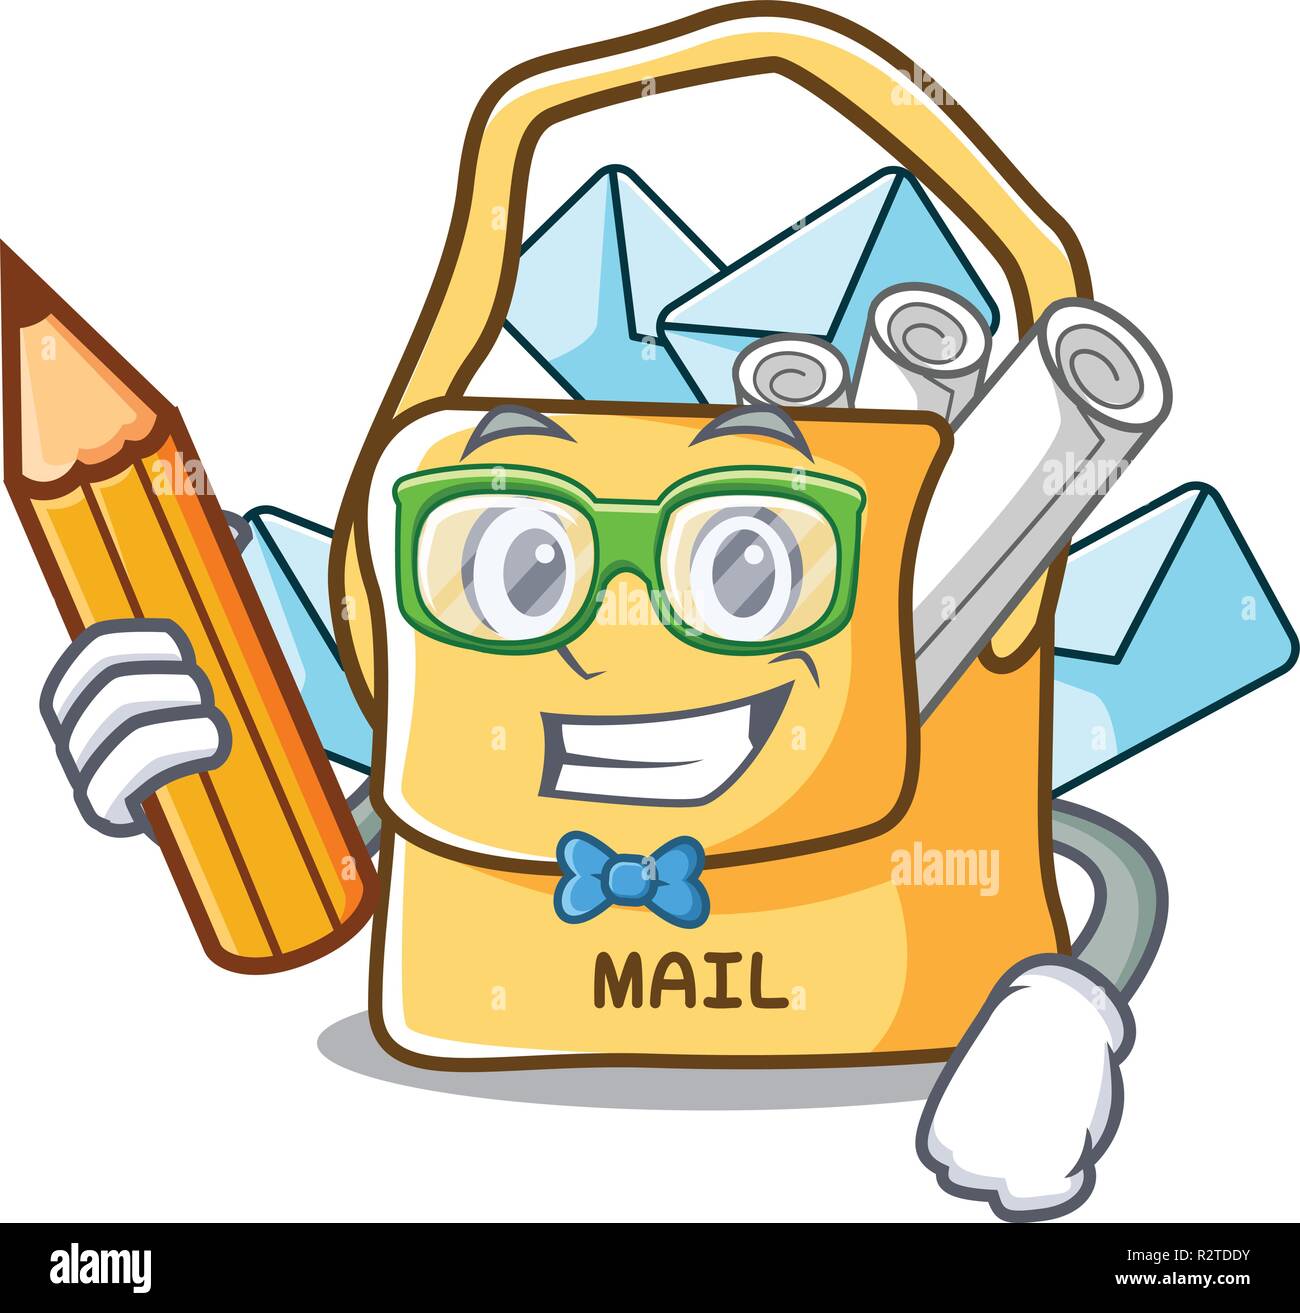 Student the bag with shape mail cartoon Stock Vector